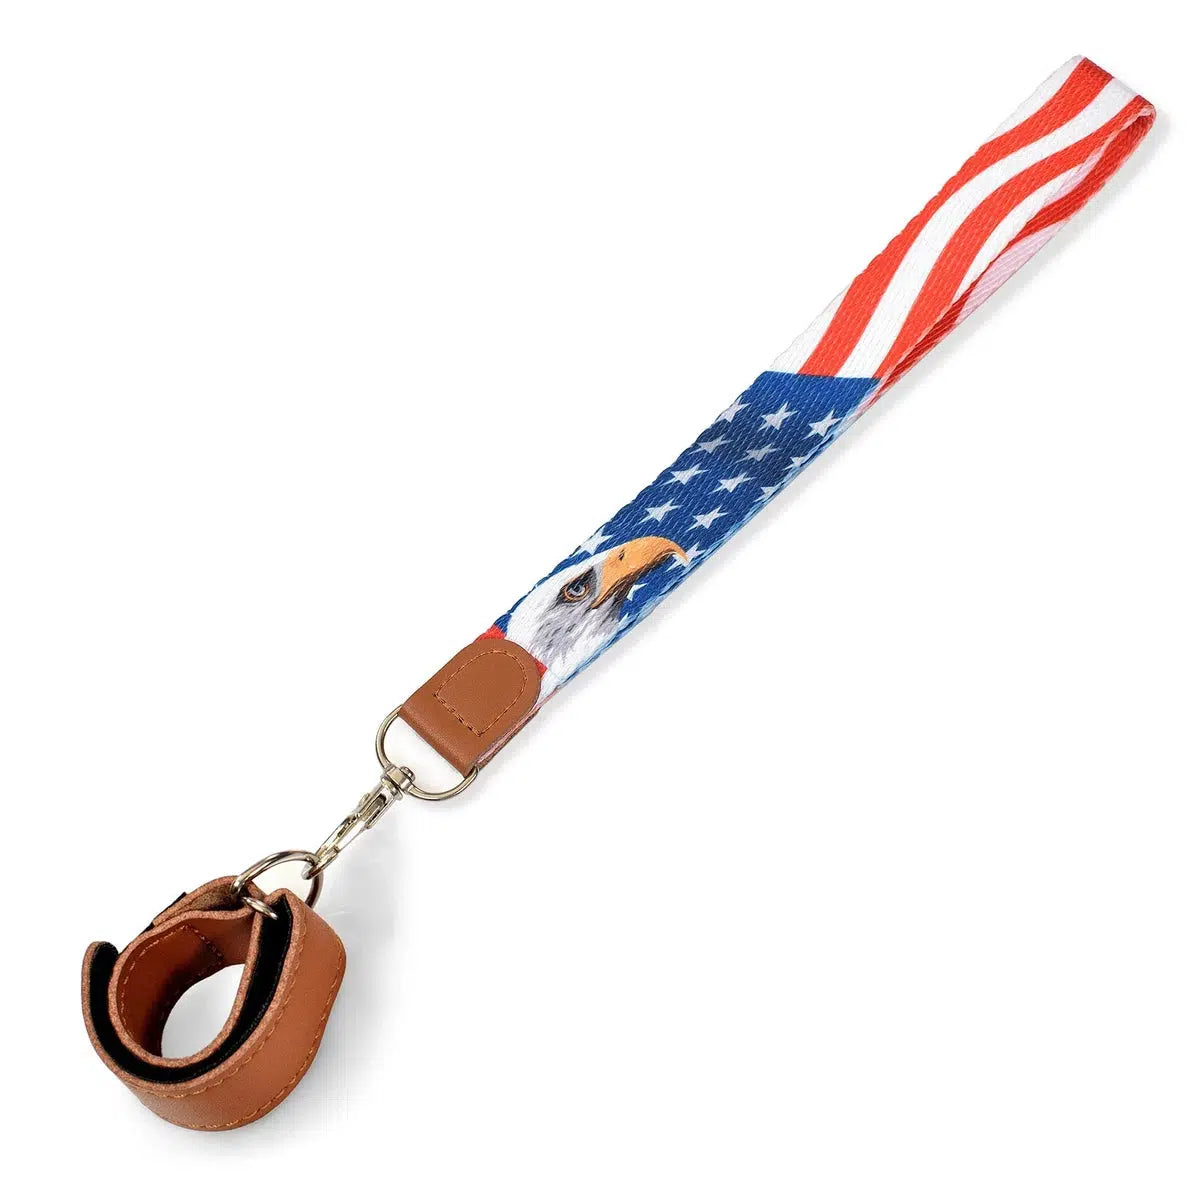 American Flag Fashionable Wrist Strap For Canes Or Walking Sticks